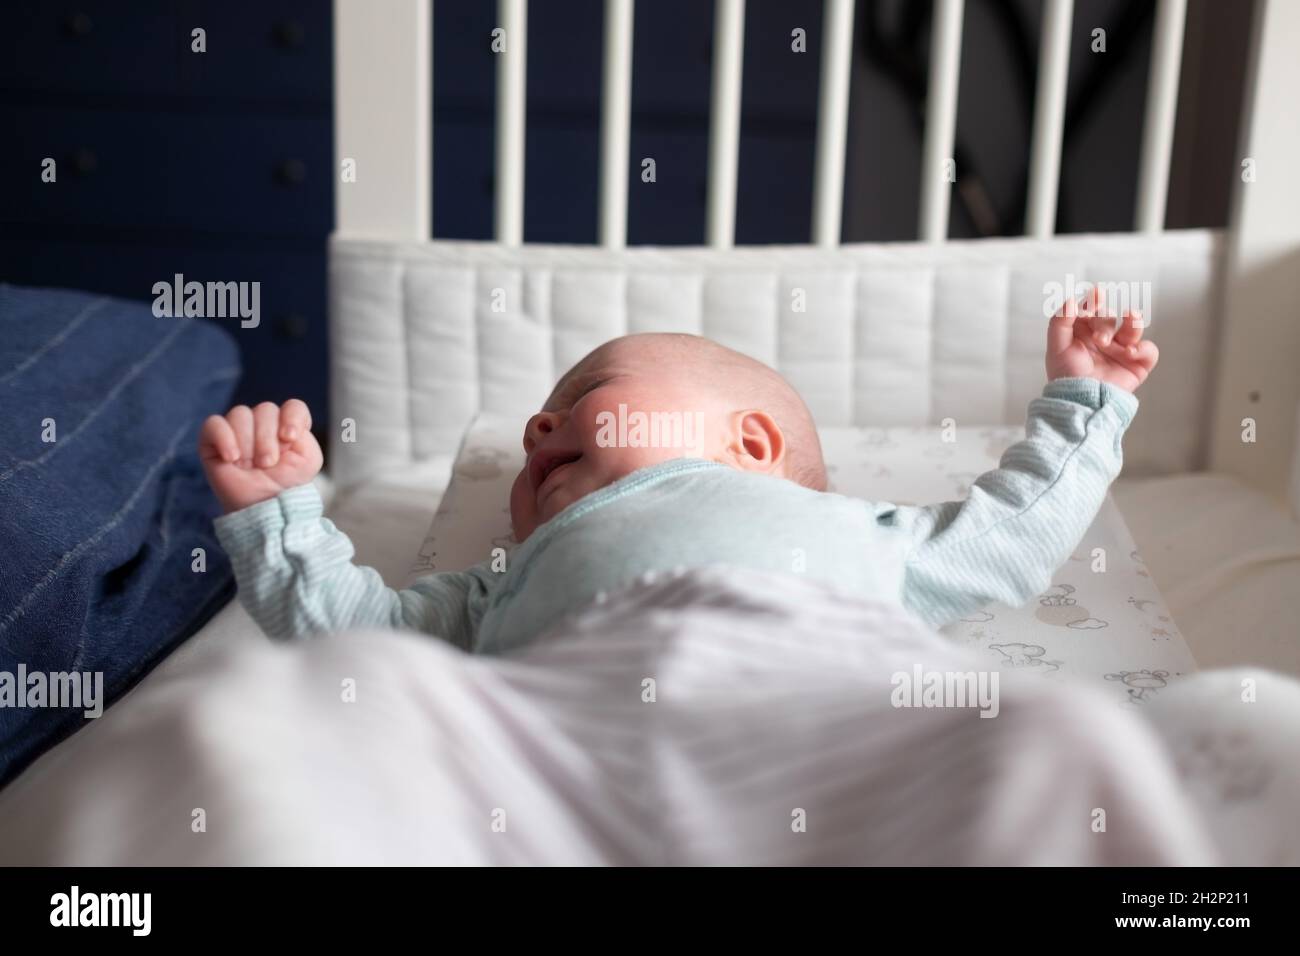 Crying caucasian baby on a bed suffering from colic pain. Stock Photo